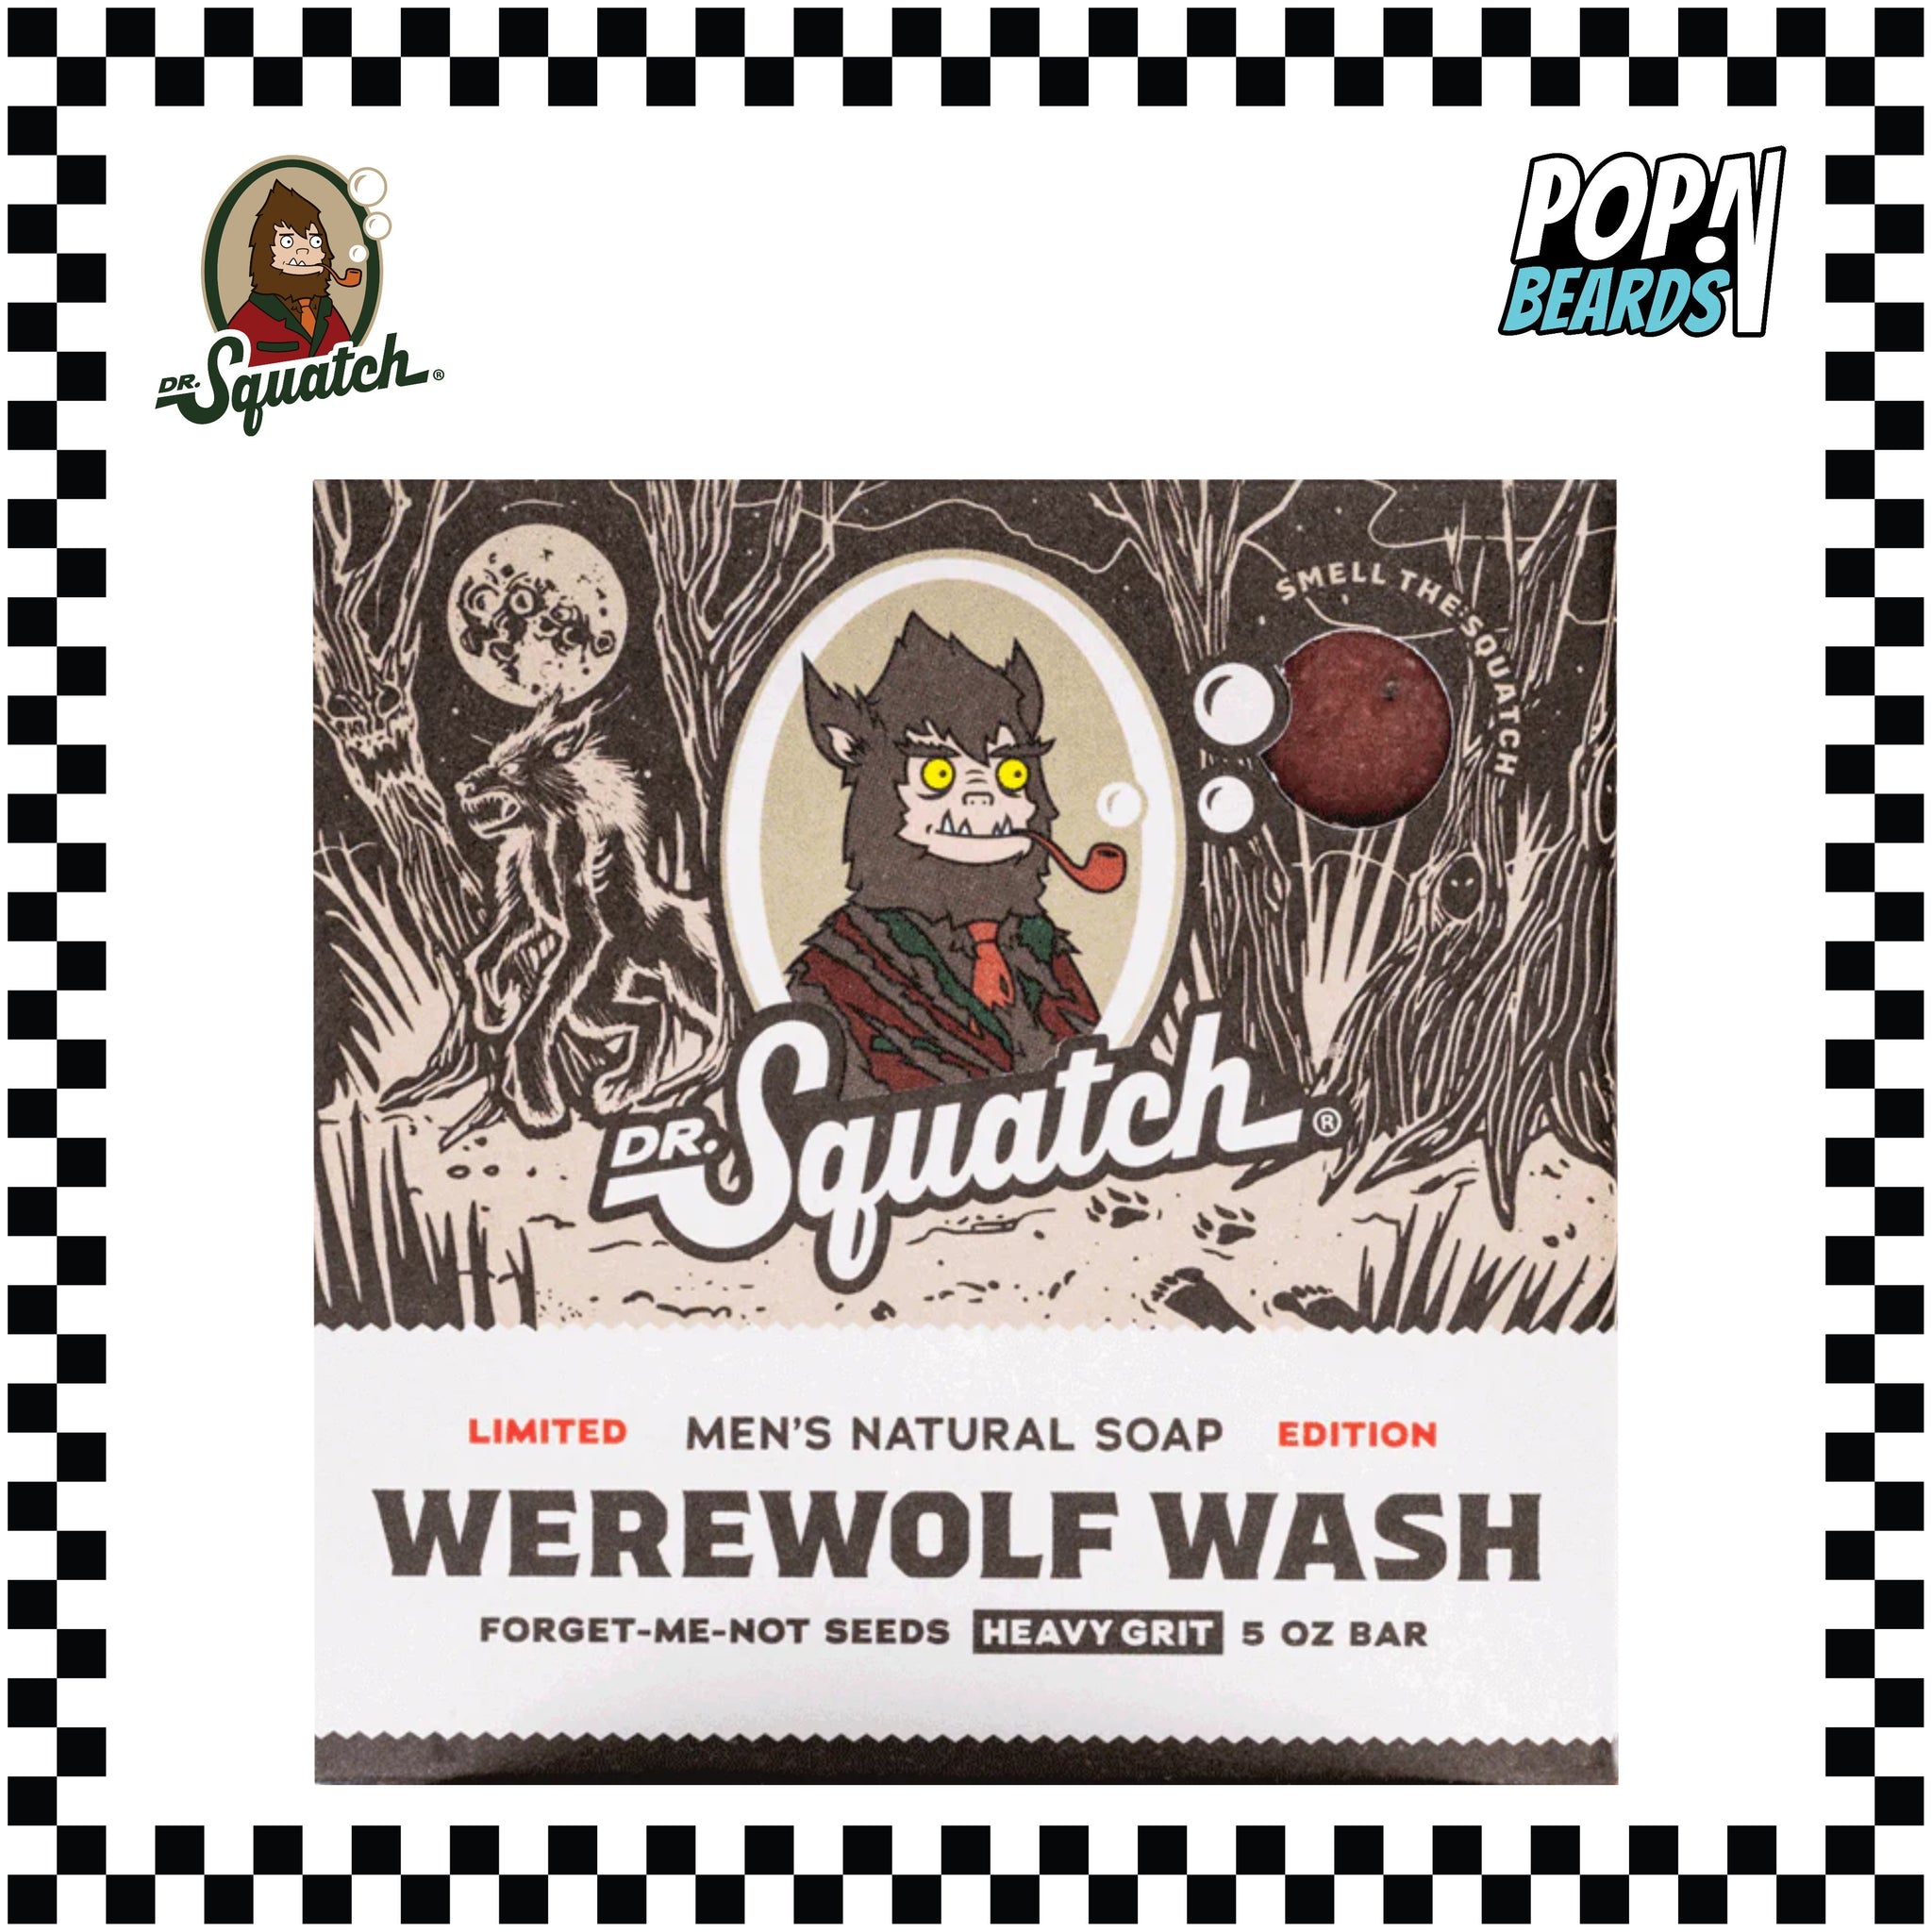 Dr. Squatch: Have you seen our latest limited edition soap?